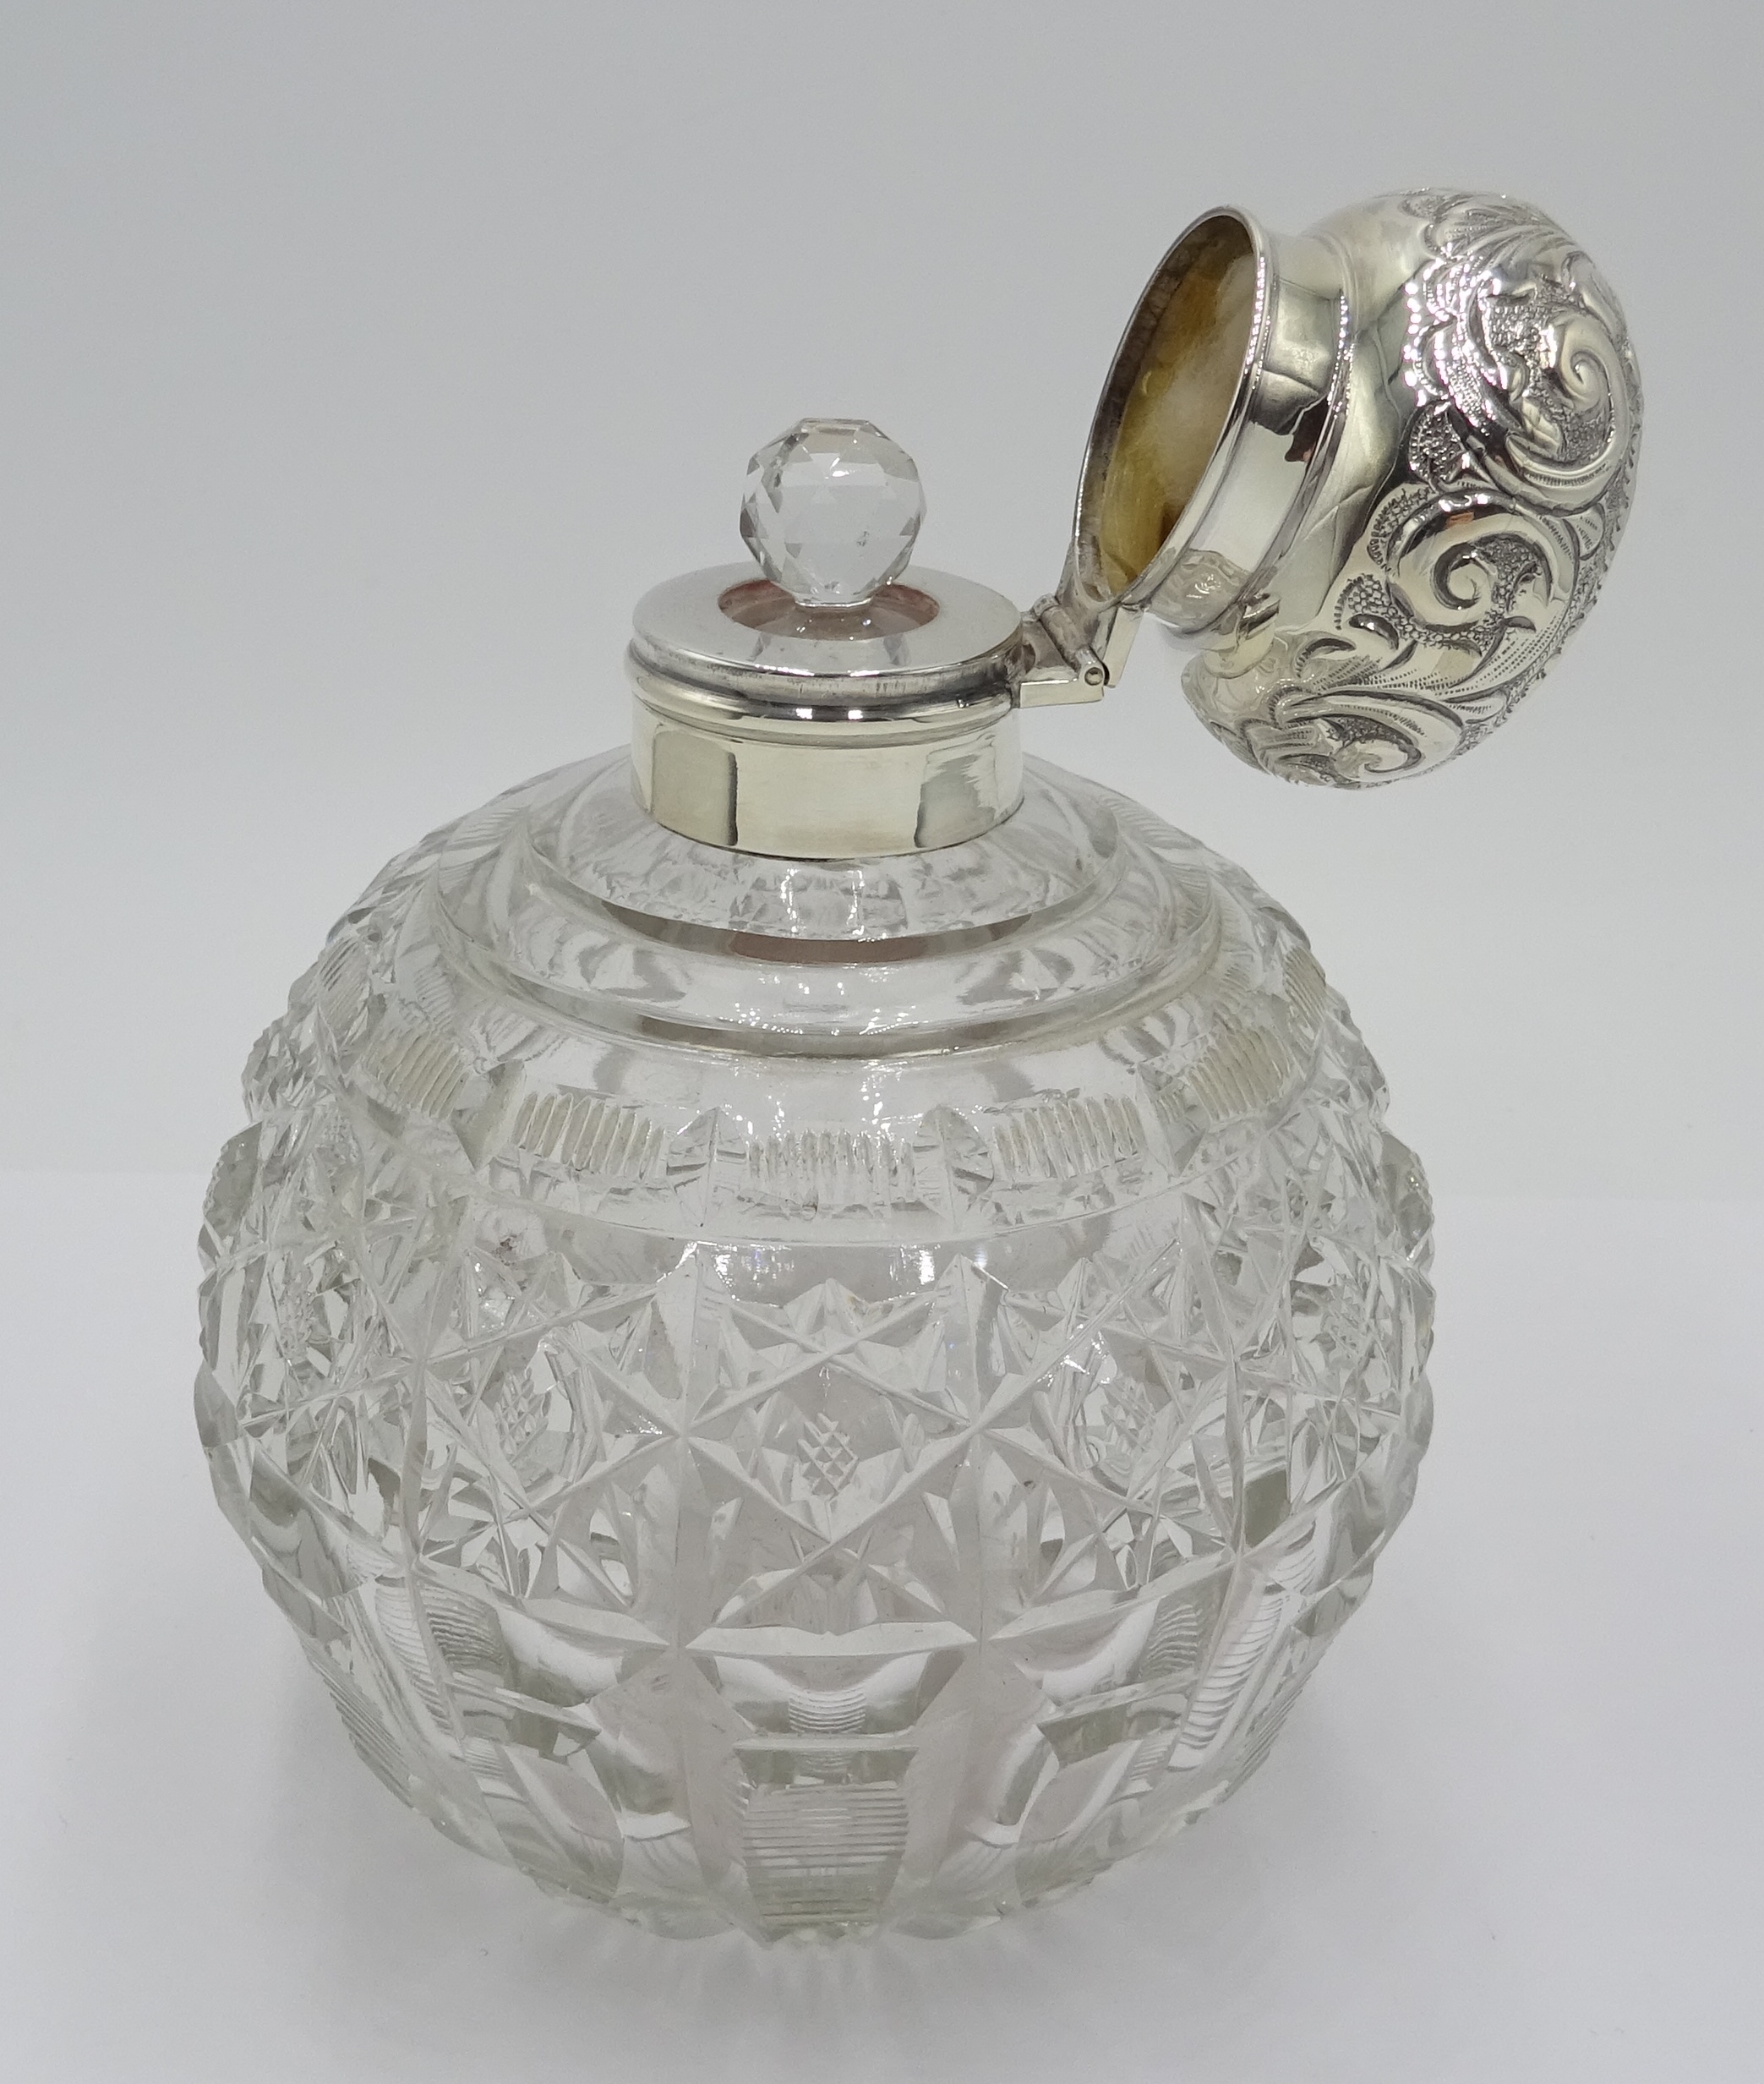 Edwardian silver mounted globular cut glass scent bottle decorated with embossed flowers and - Image 3 of 5